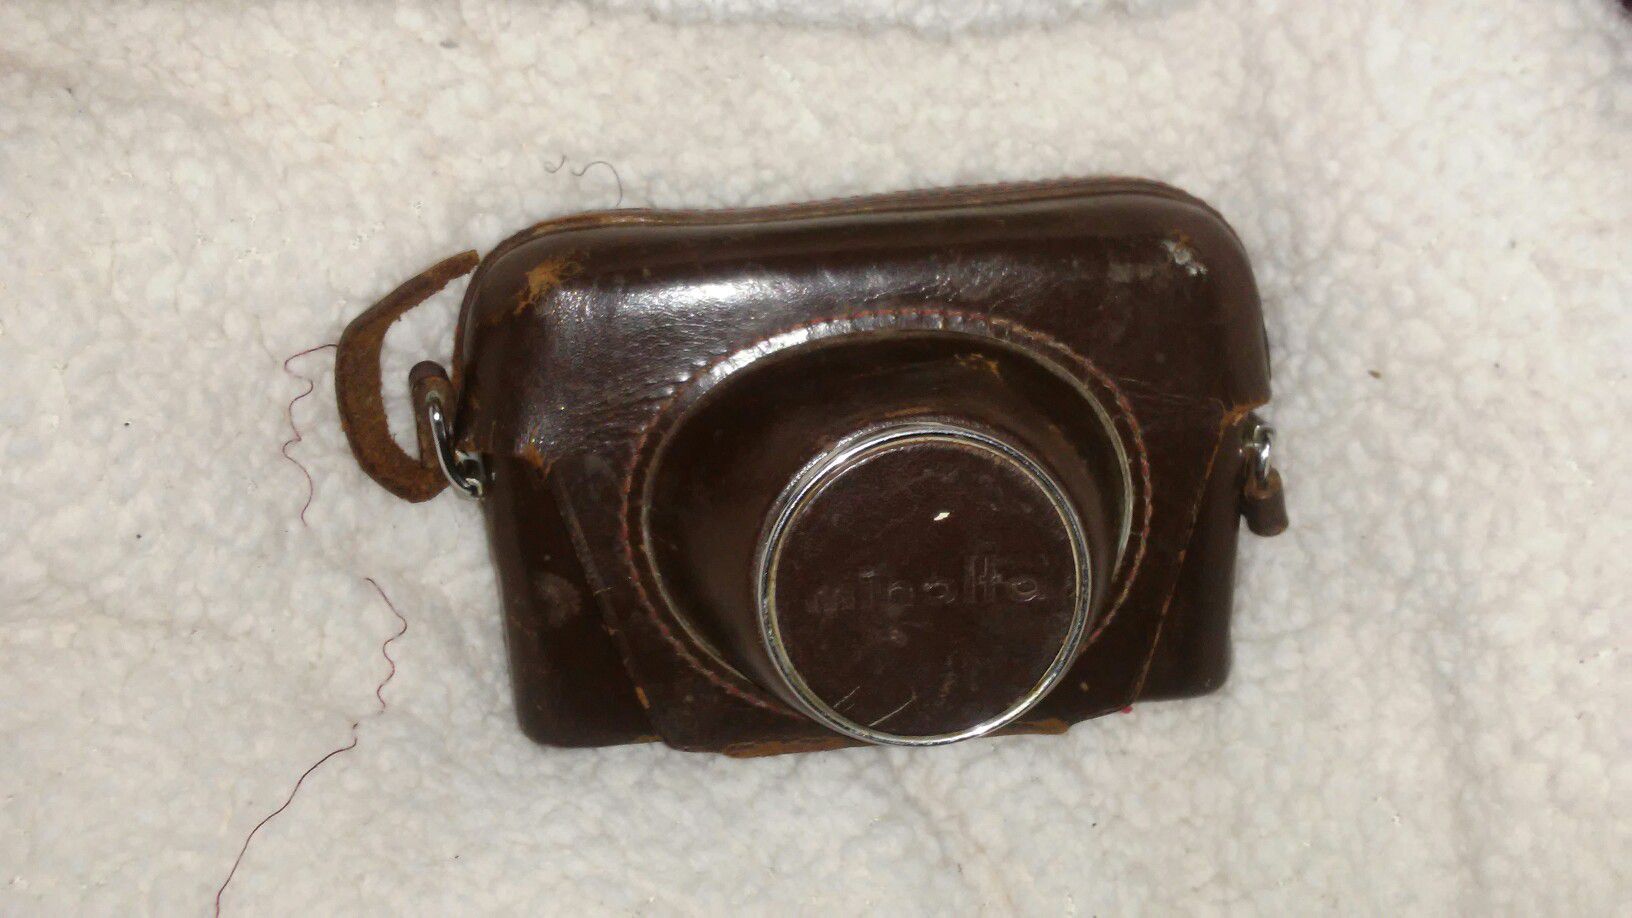 Original 1962 minolta HI-MATIC w/leather case in perfect working order!! I am willing to trade for a real nice drone...